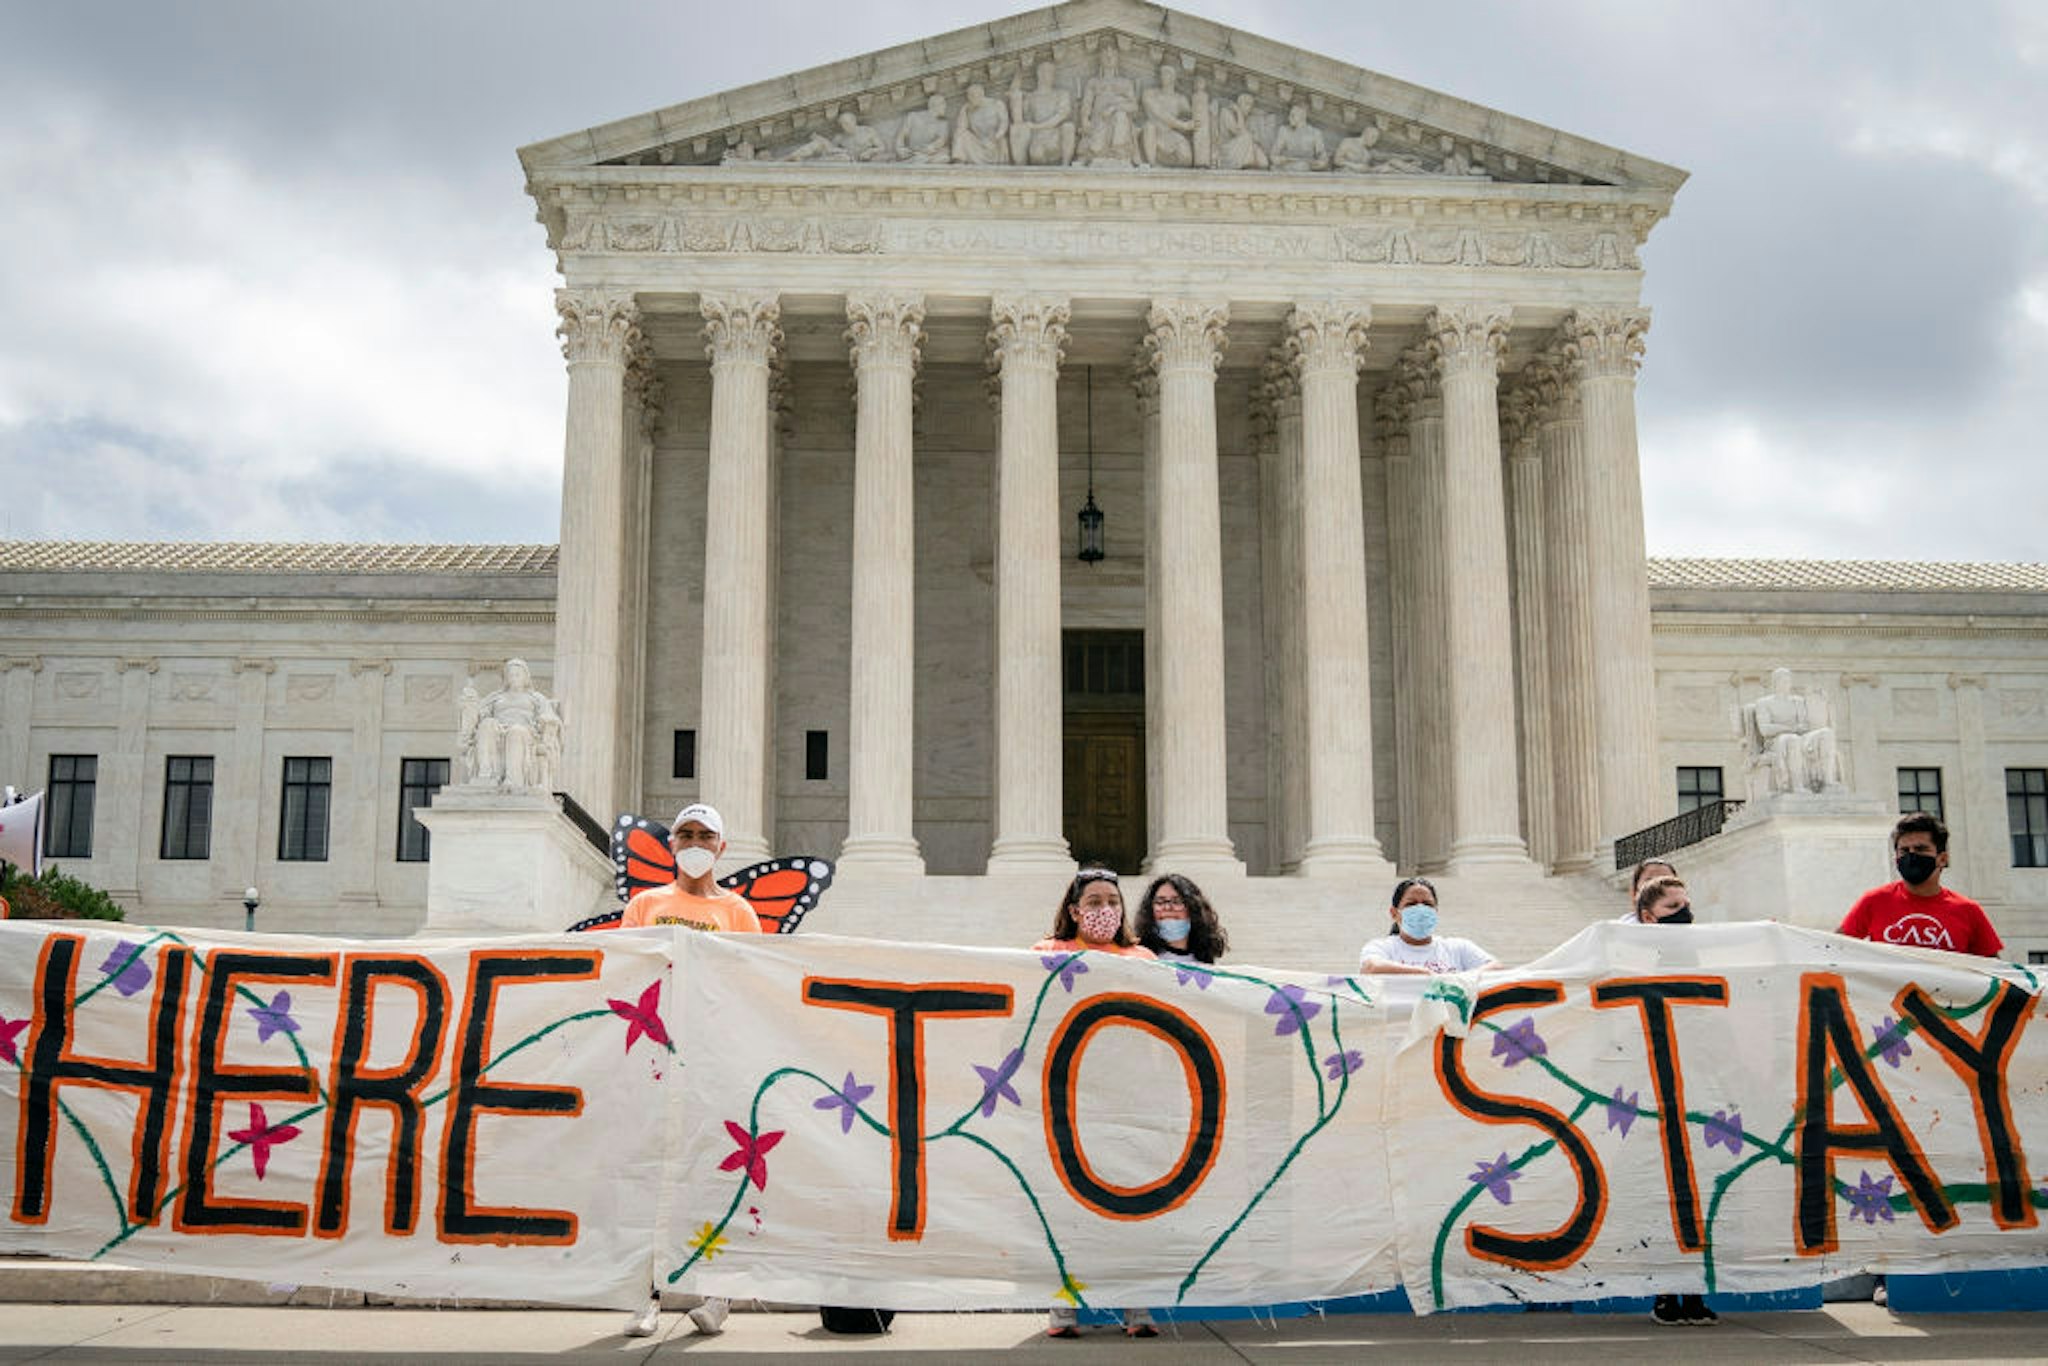 DACA recipients and their supporters rally outside the U.S. Supreme Court on June 18, 2020 in Washington, DC.